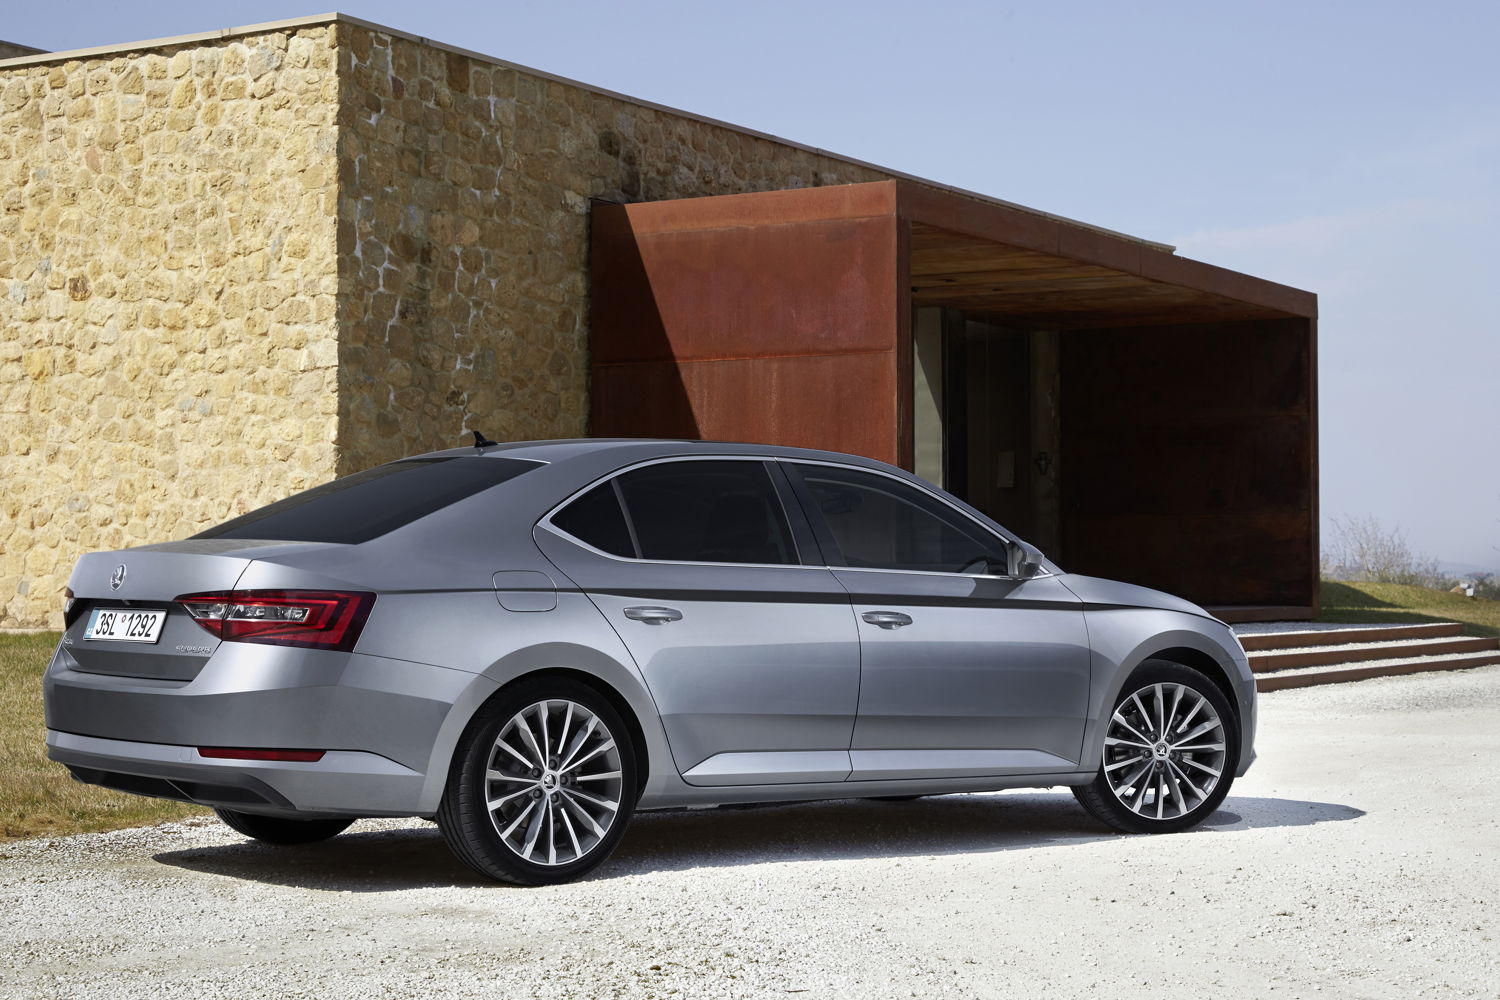 In addition to the successful compact models OCTAVIA and RAPID, the ŠKODA SUPERB (photo) especially is enjoying great popularity. 13,500 customers worldwide opted for the brand’s flagship in September 2016 - twice as many as in September 2015.